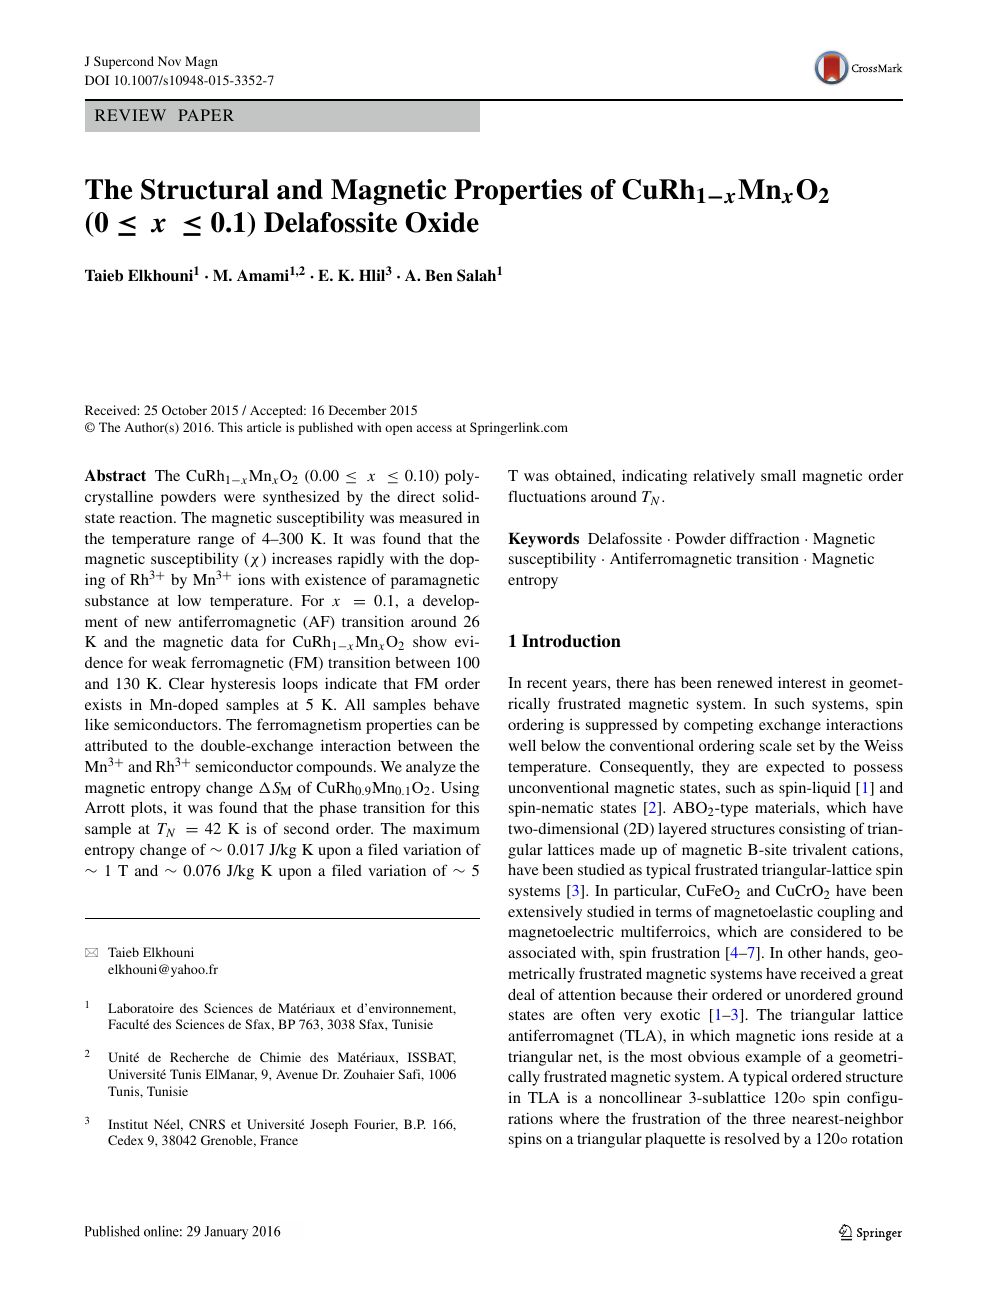 The Structural And Magnetic Properties Of Curh1 X Mn X O2 0 X 0 1 Delafossite Oxide Topic Of Research Paper In Nano Technology Download Scholarly Article Pdf And Read For Free